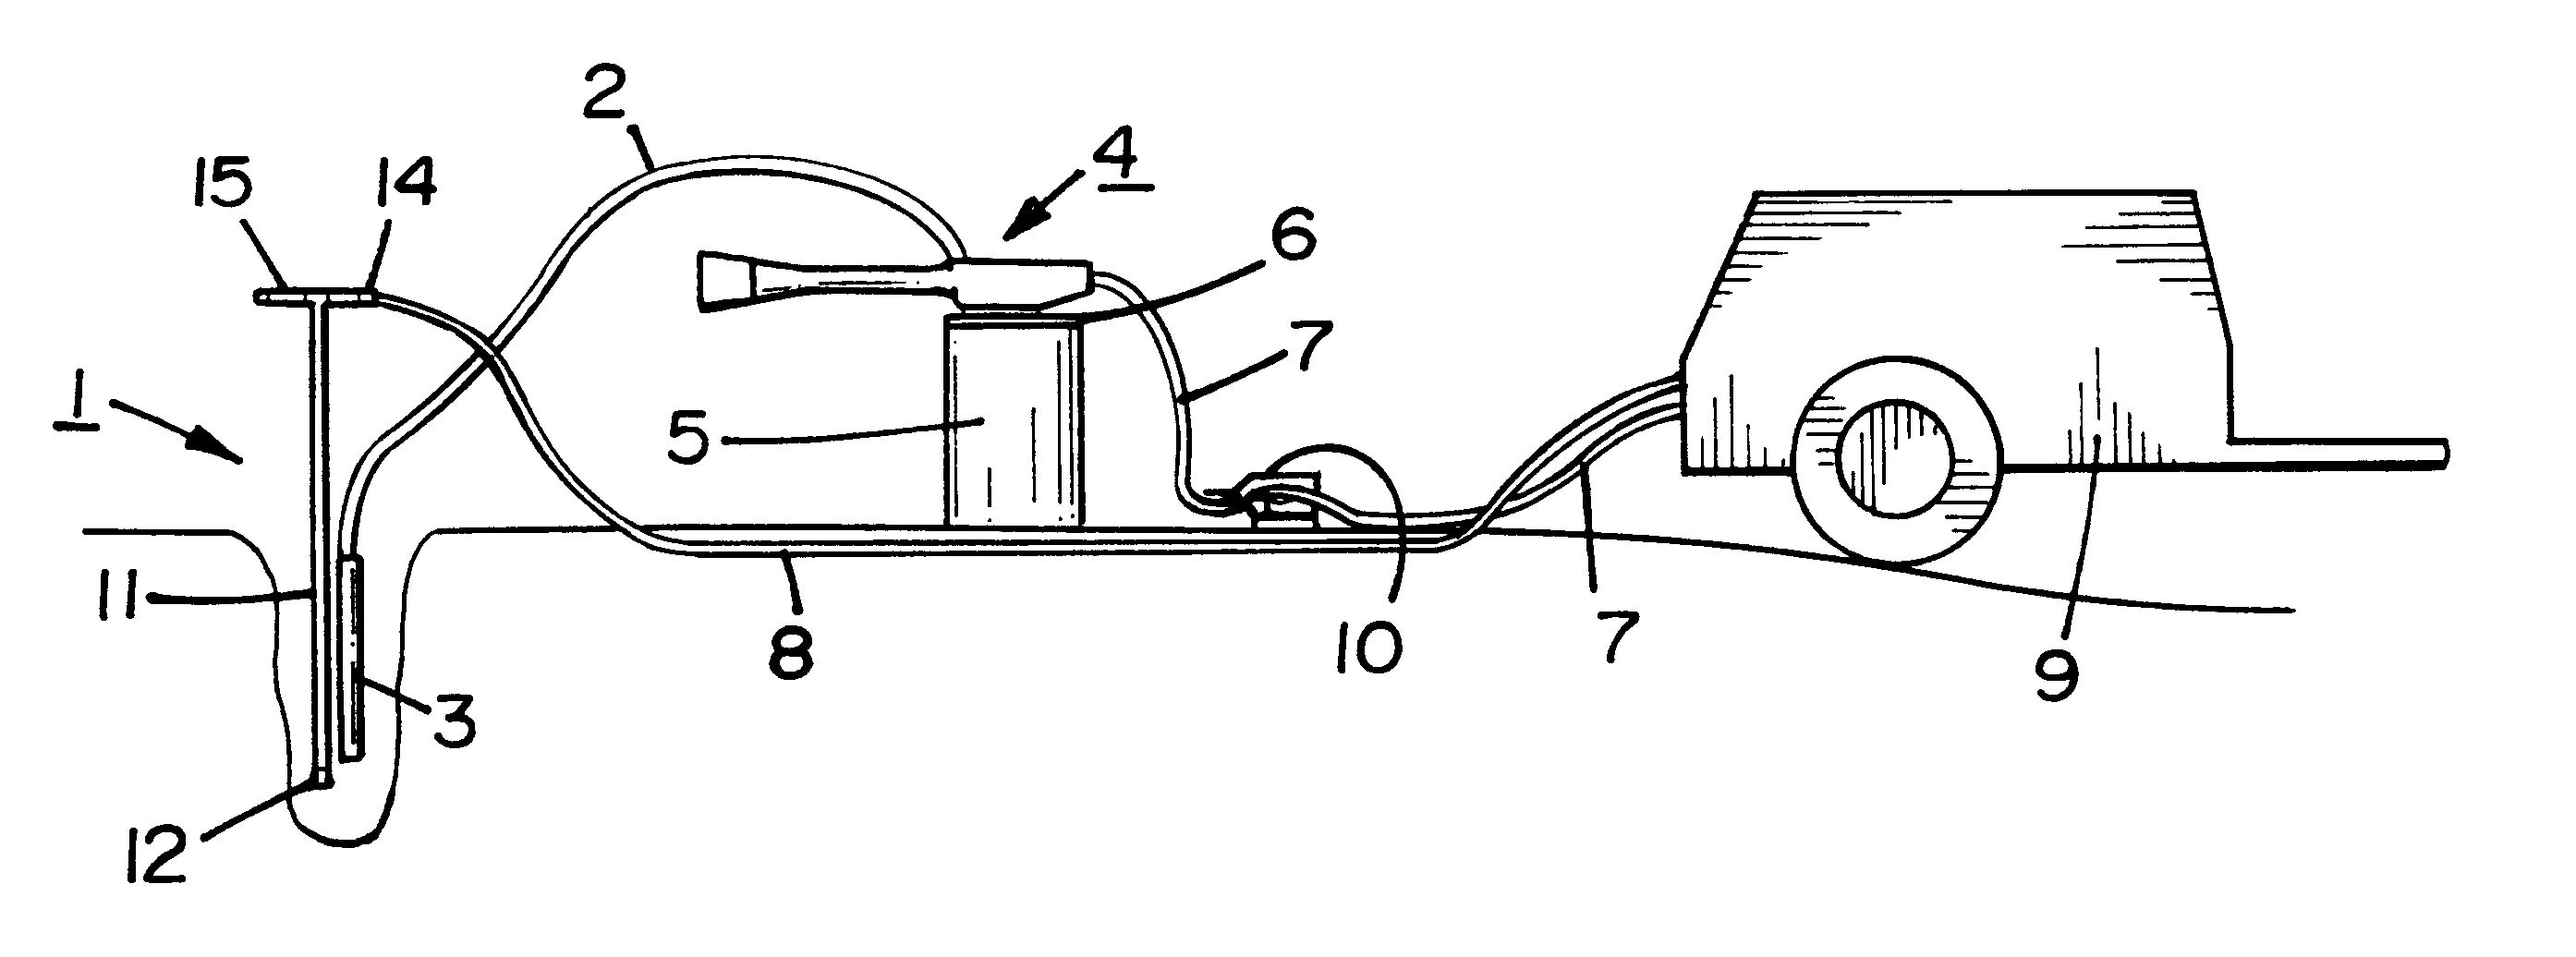 Vacuum excavation apparatus having an improved air lance, air lance nozzle, and vacuum system including a multistage venturi ejector